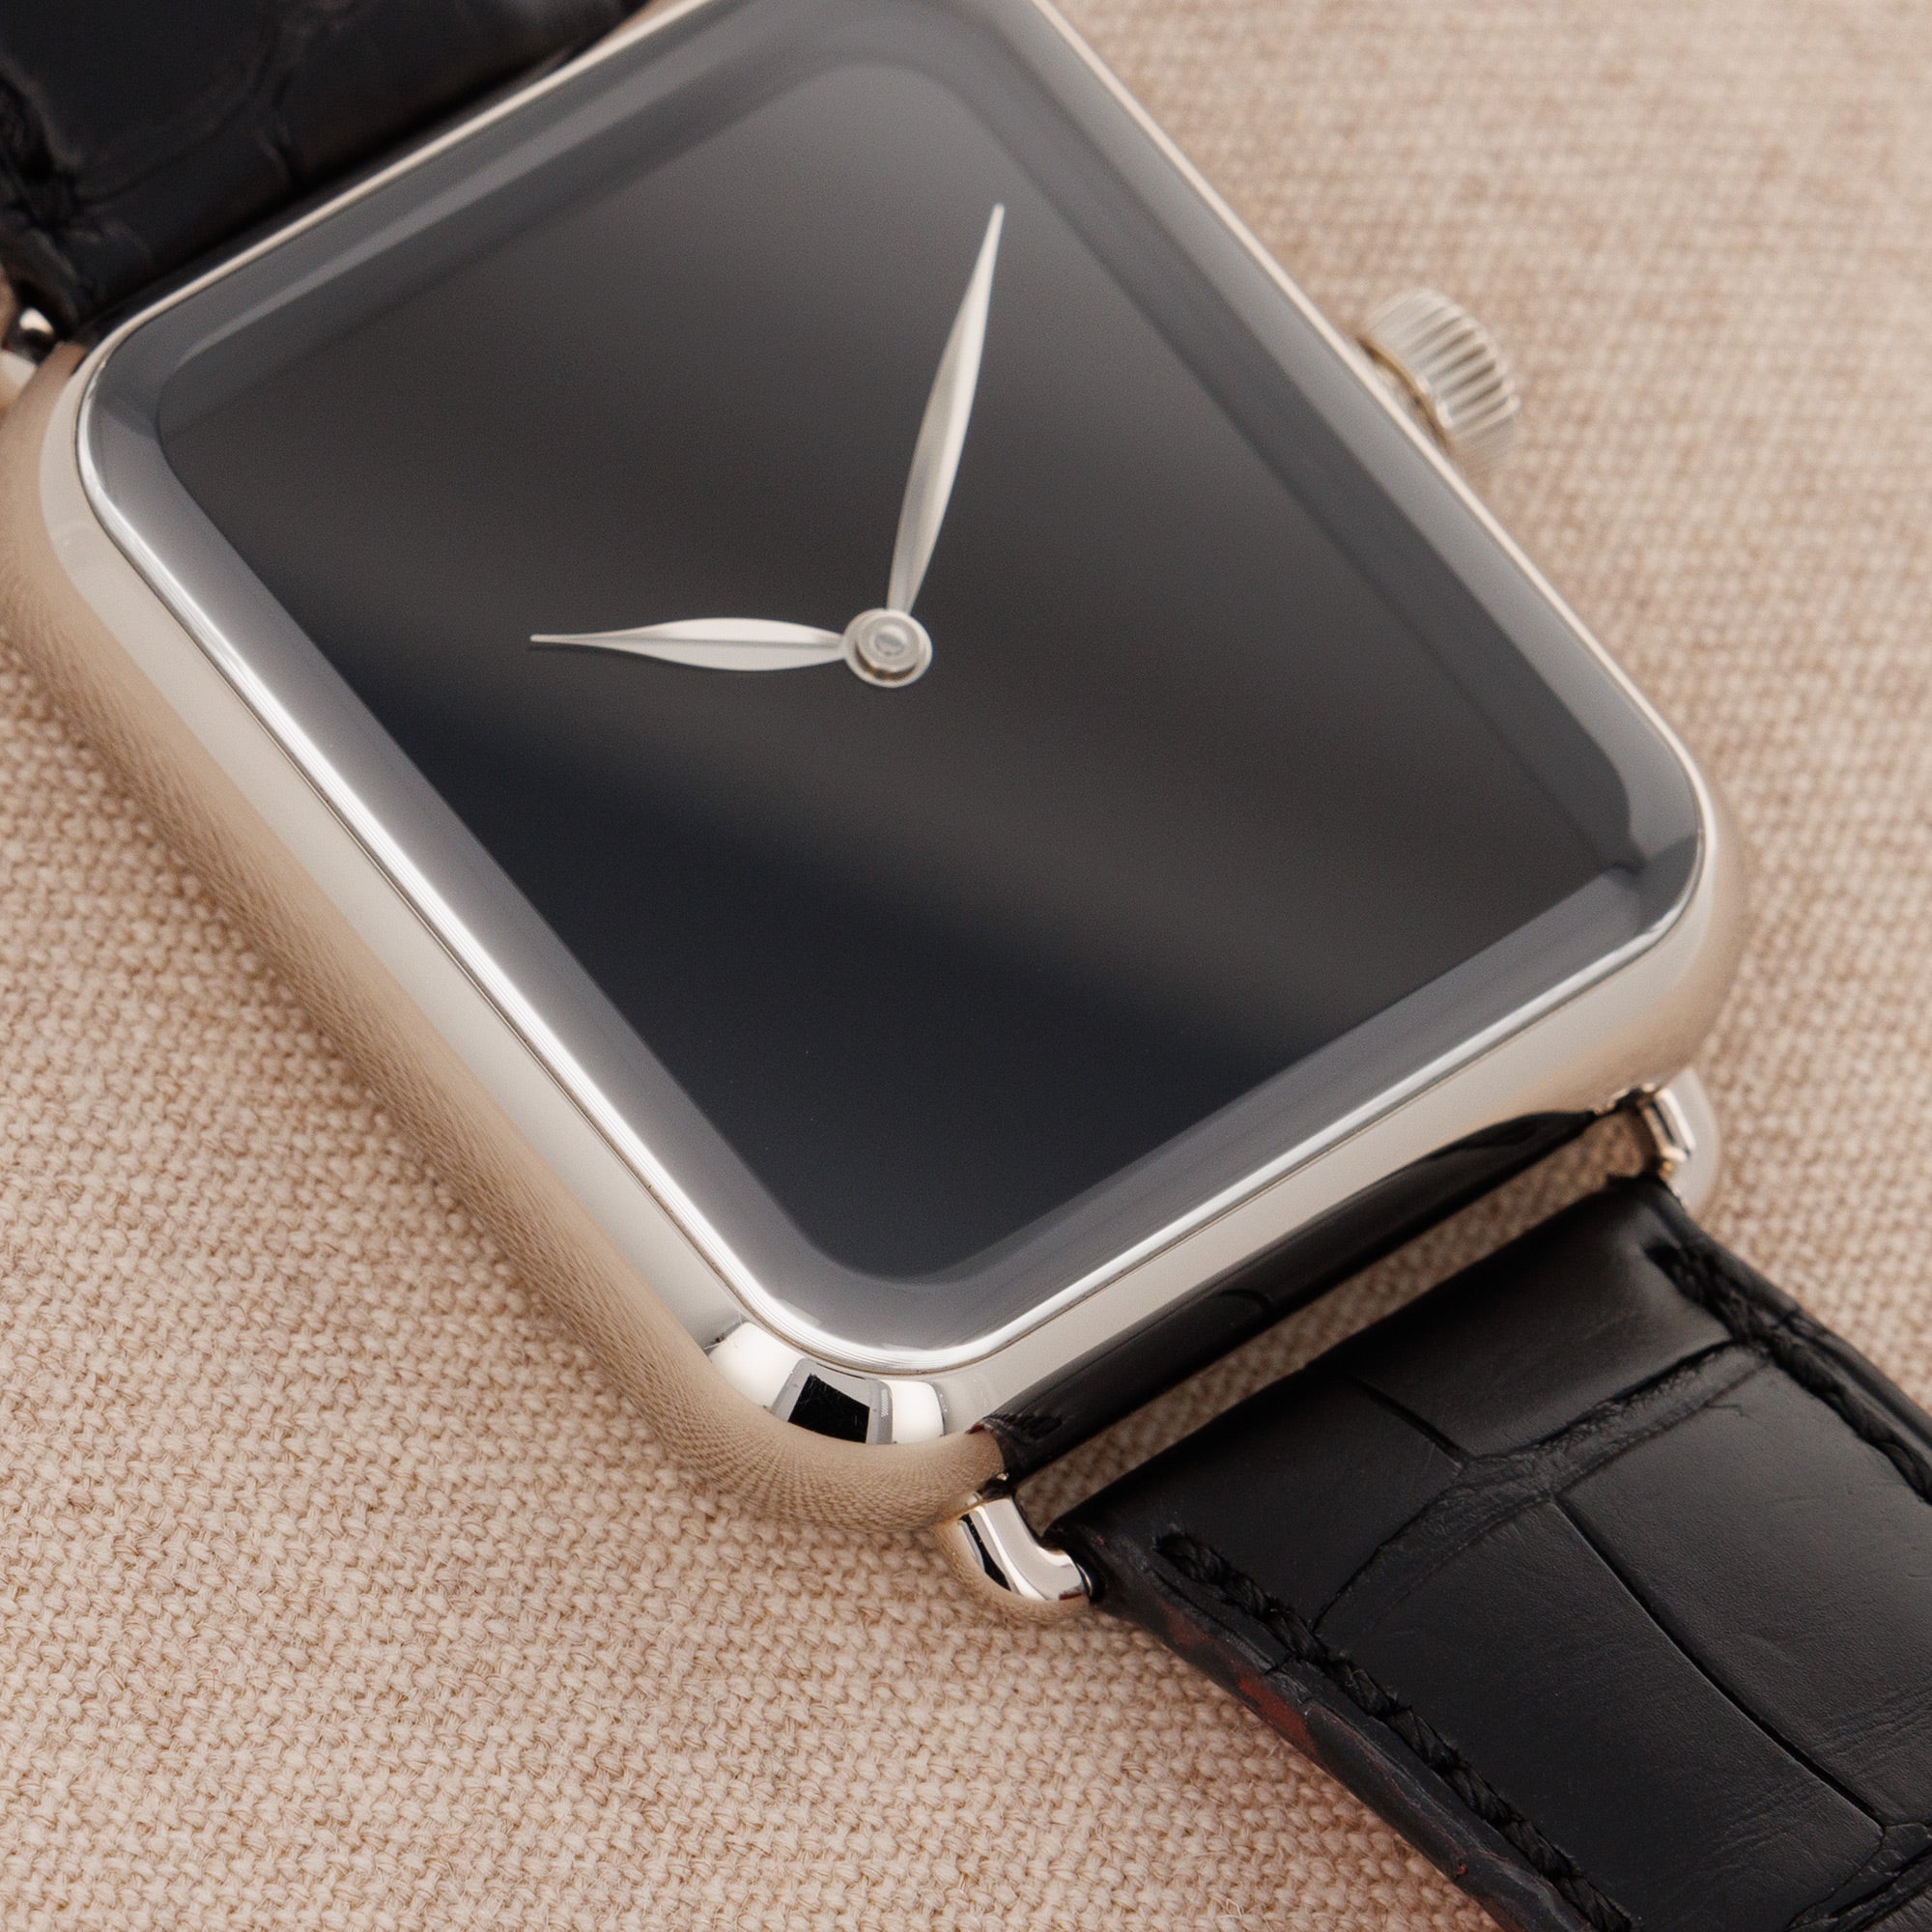 H. Moser &amp; Cie - H. Moser &amp; Cie. White Gold Swiss Alp Zzzz Ref. 5324-0207 - The Keystone Watches